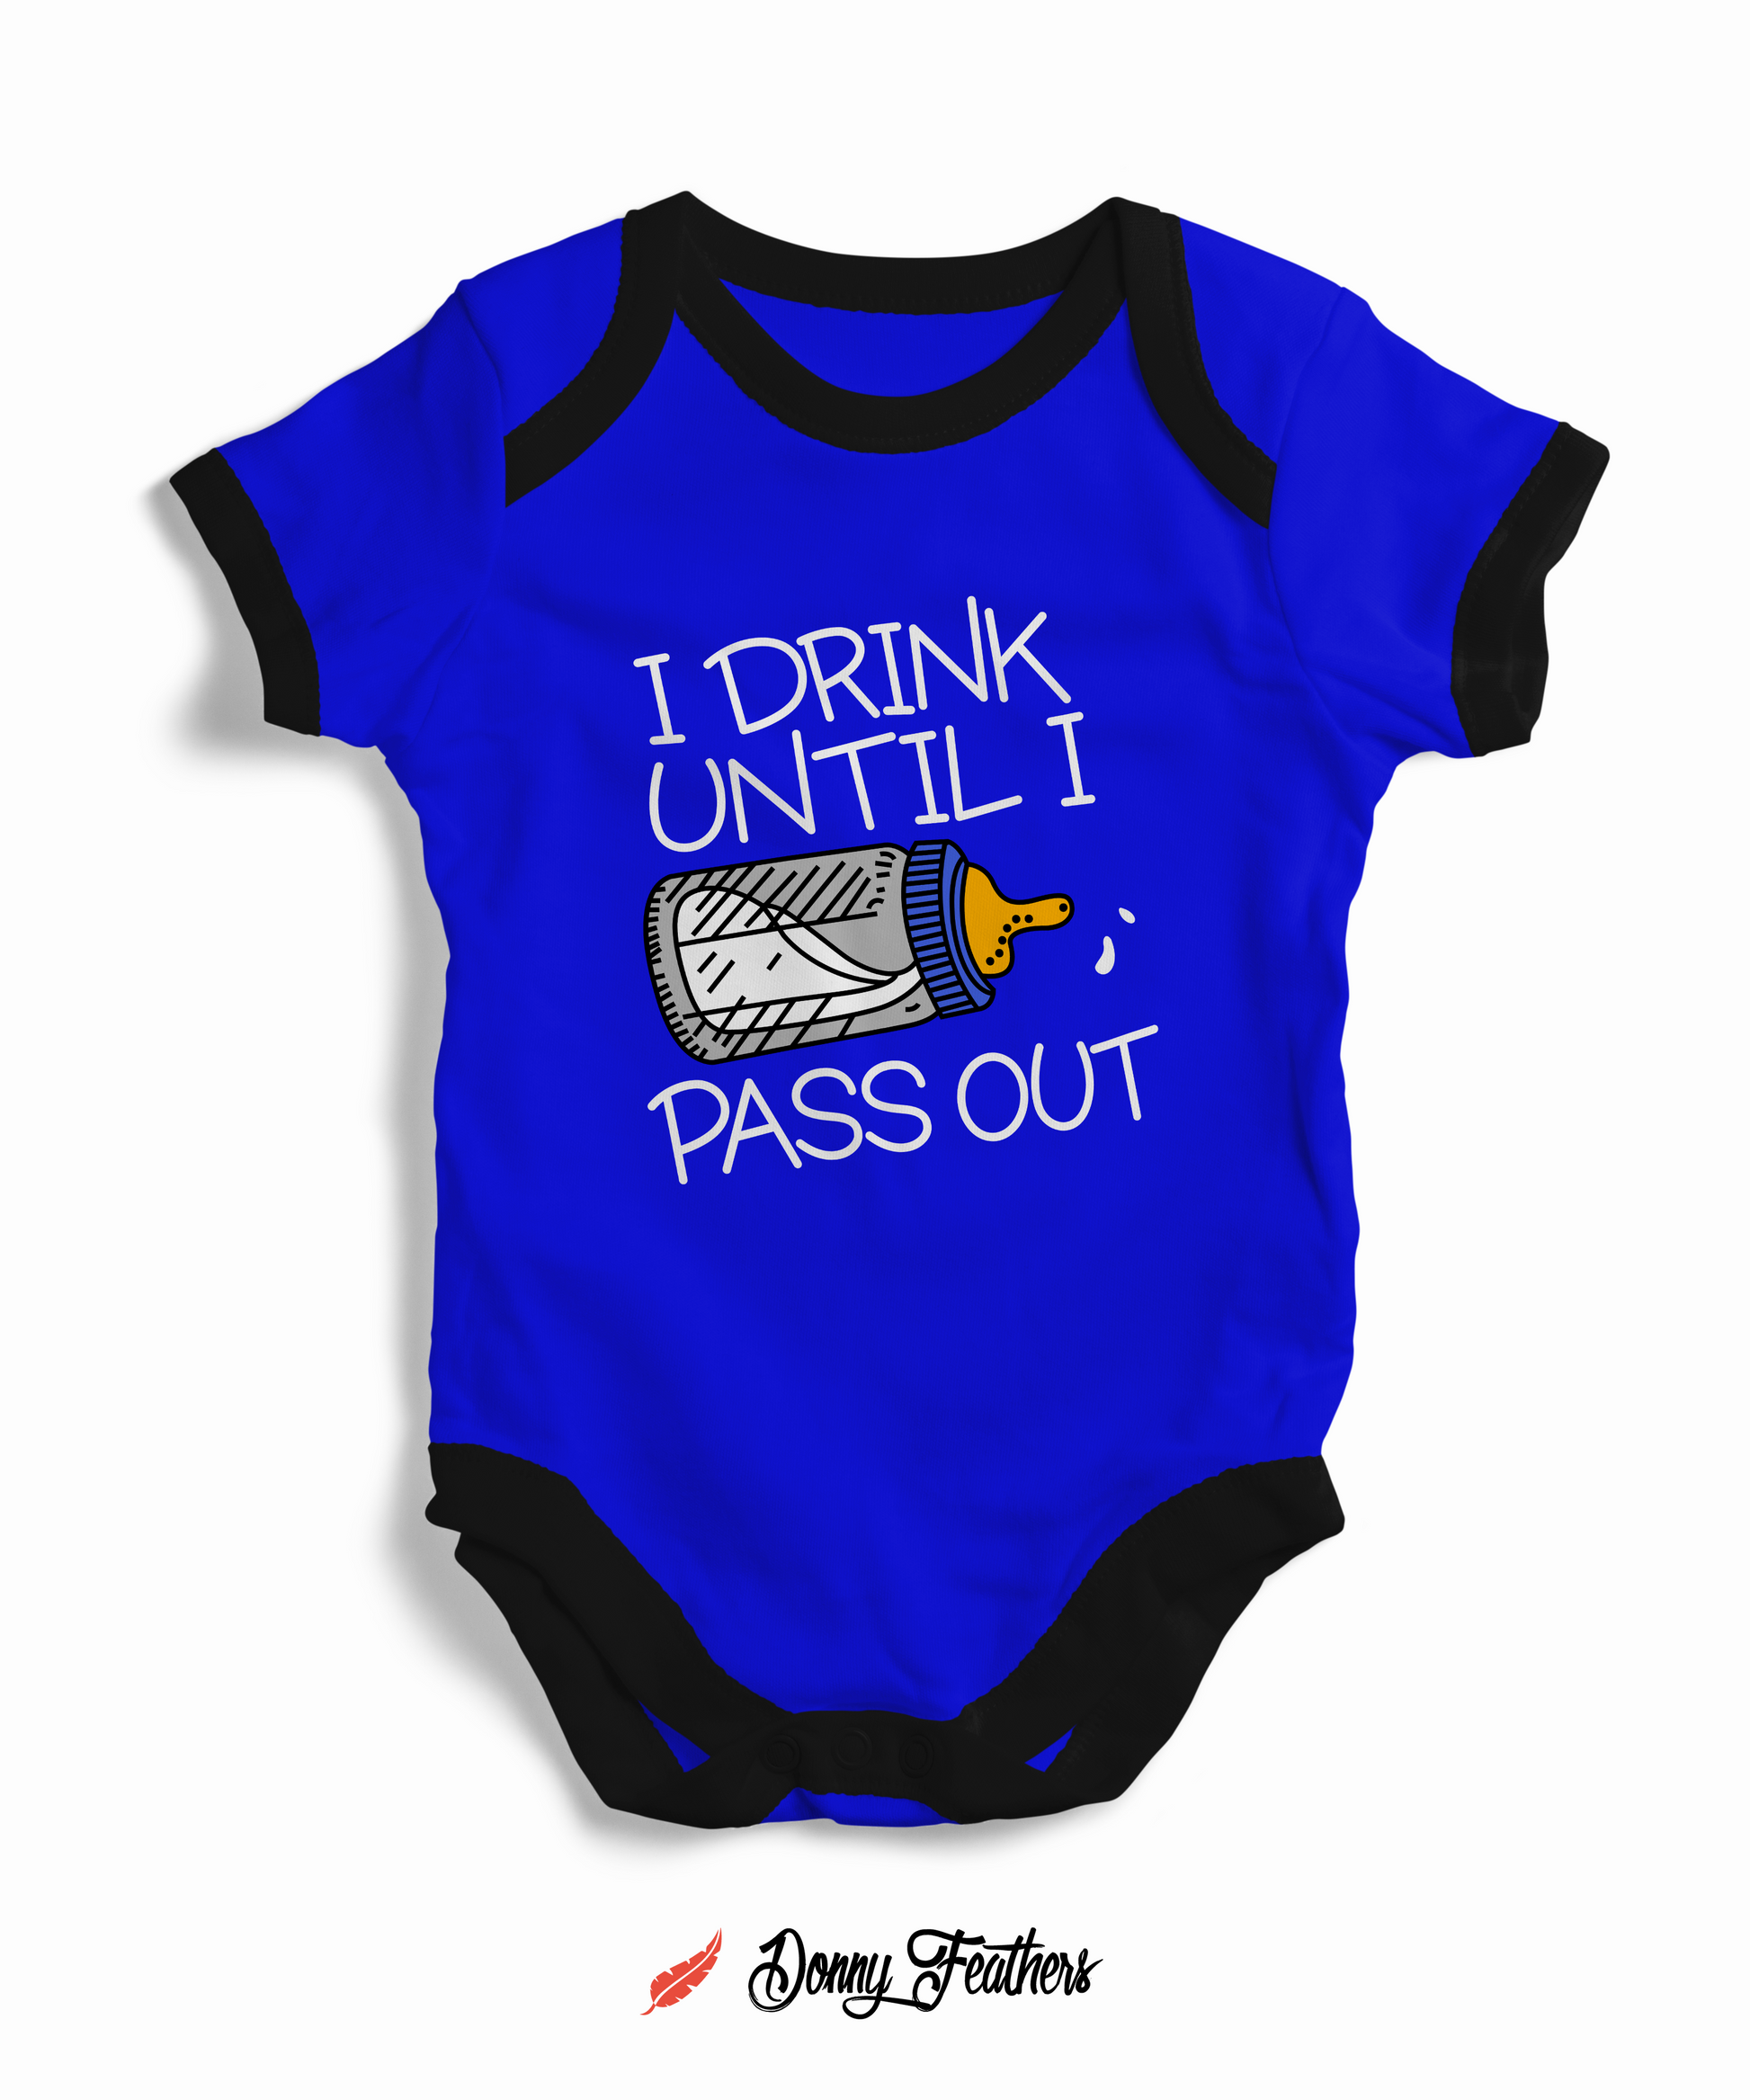 Baby Bodysuits | I Drink Until I Pass Out Romper (Blue) By: Donny Feathers